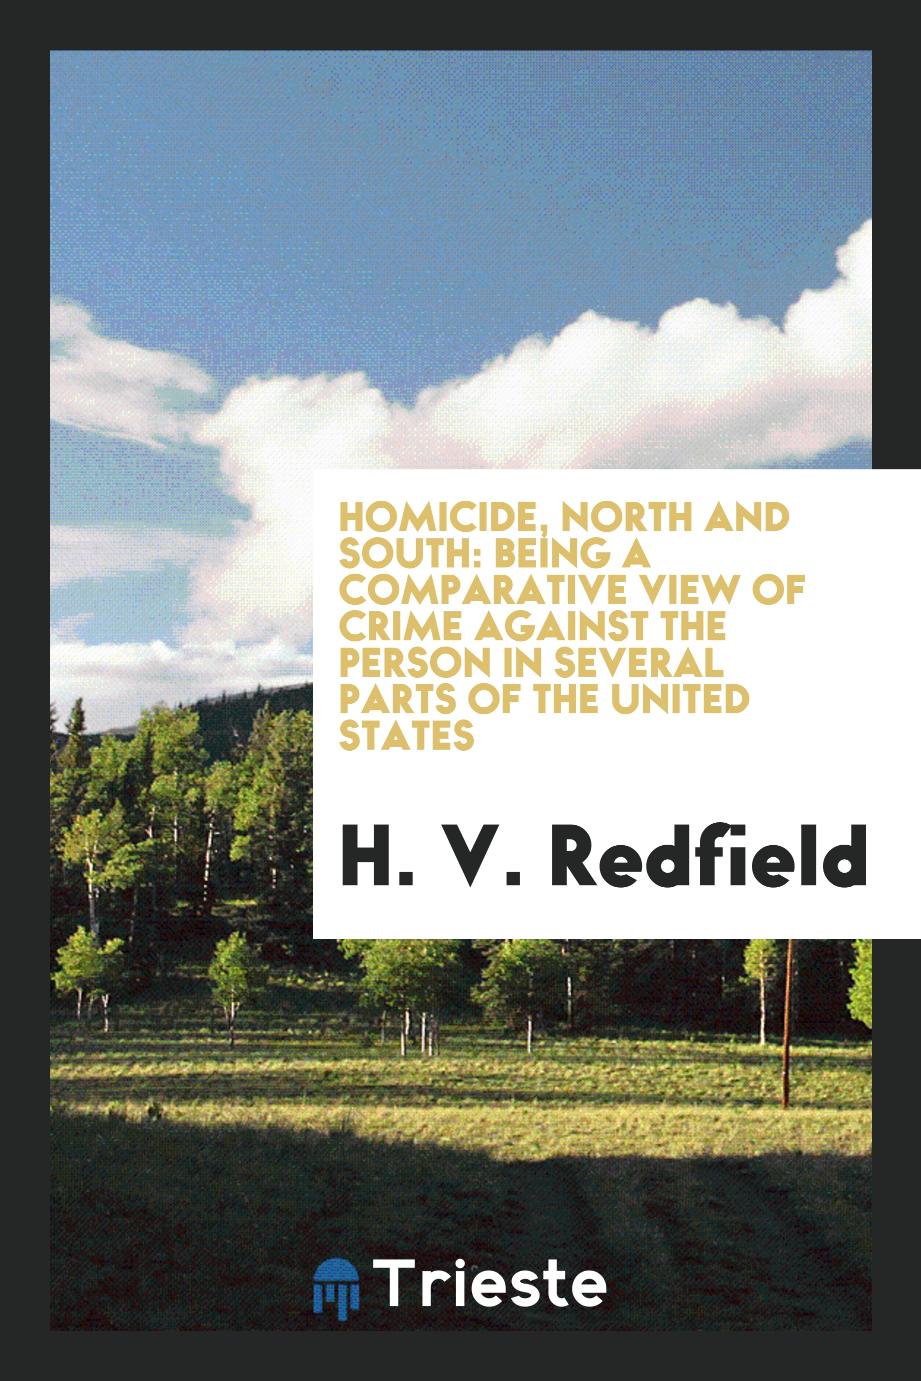 Homicide, North and South: being a comparative view of crime against the person in several parts of the United States